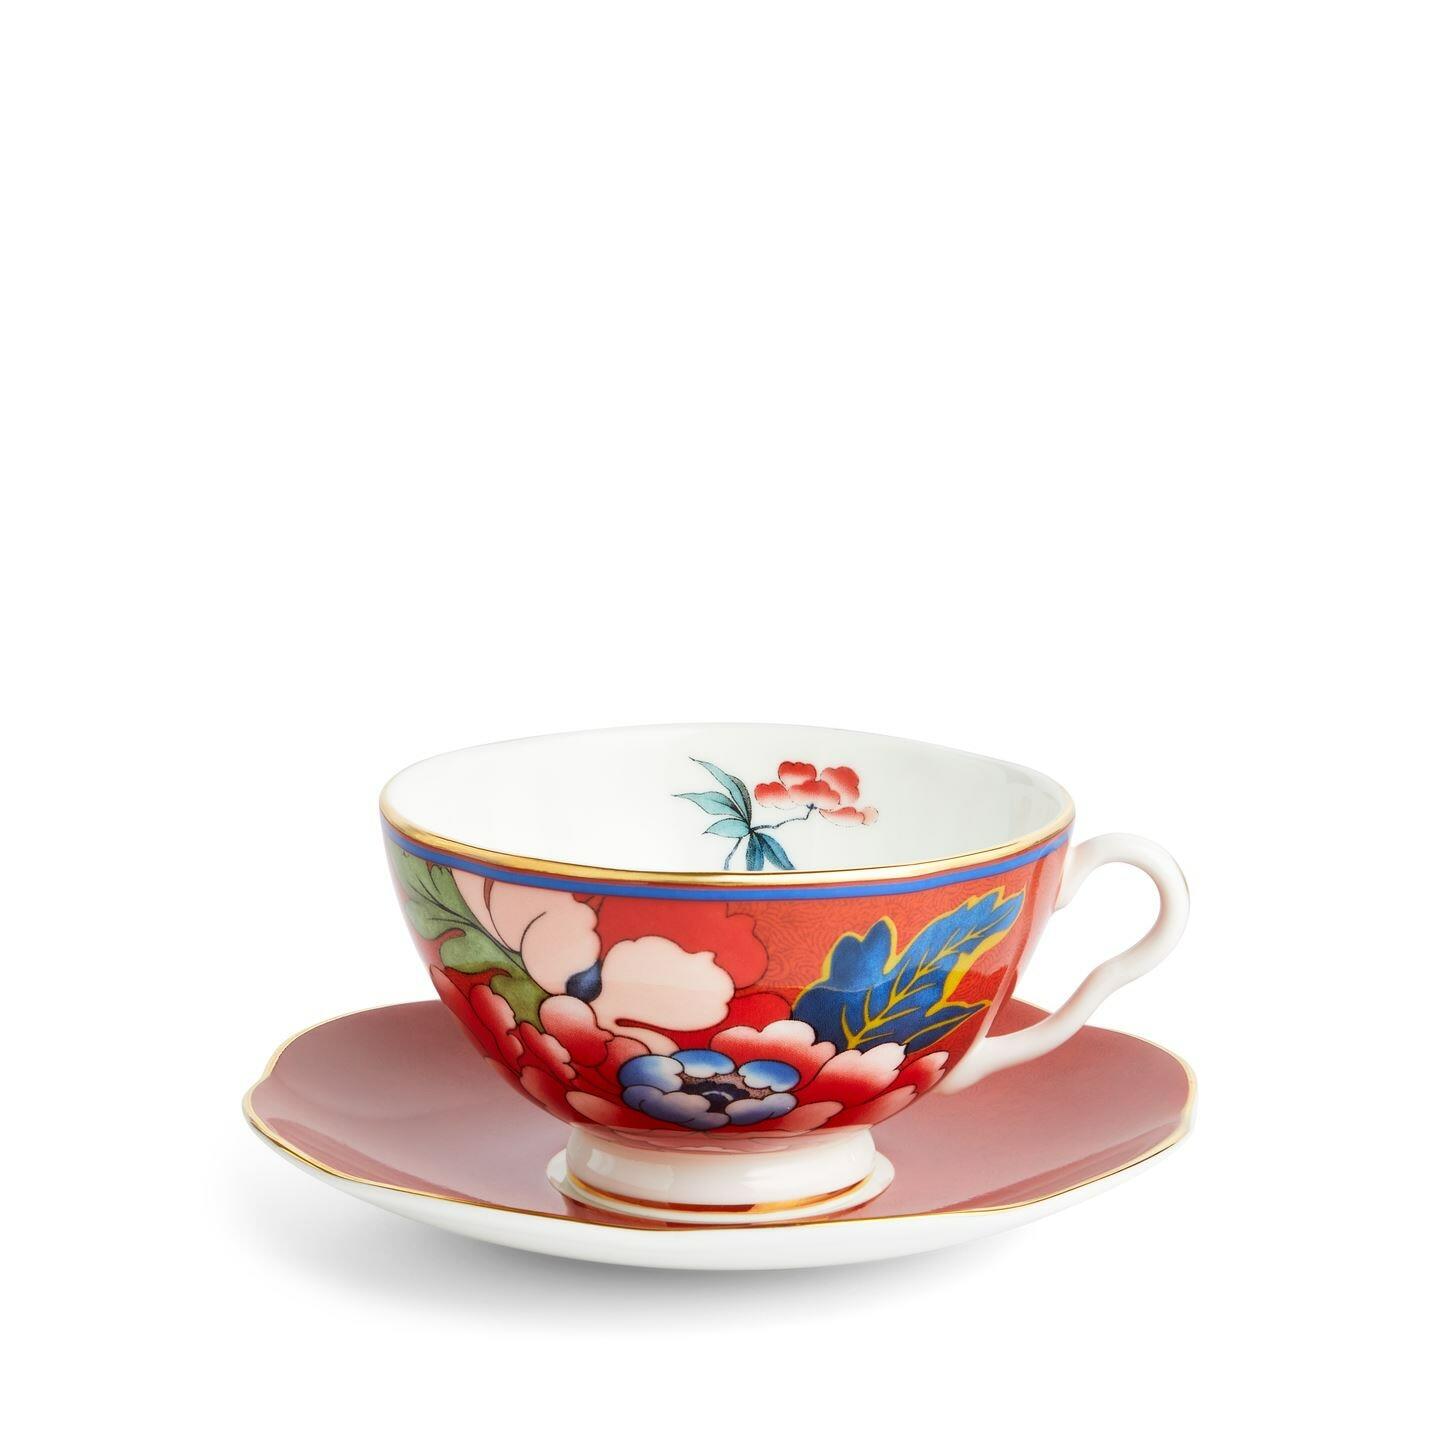 Wedgwood Paeonia Blush Red Teacup and Saucer